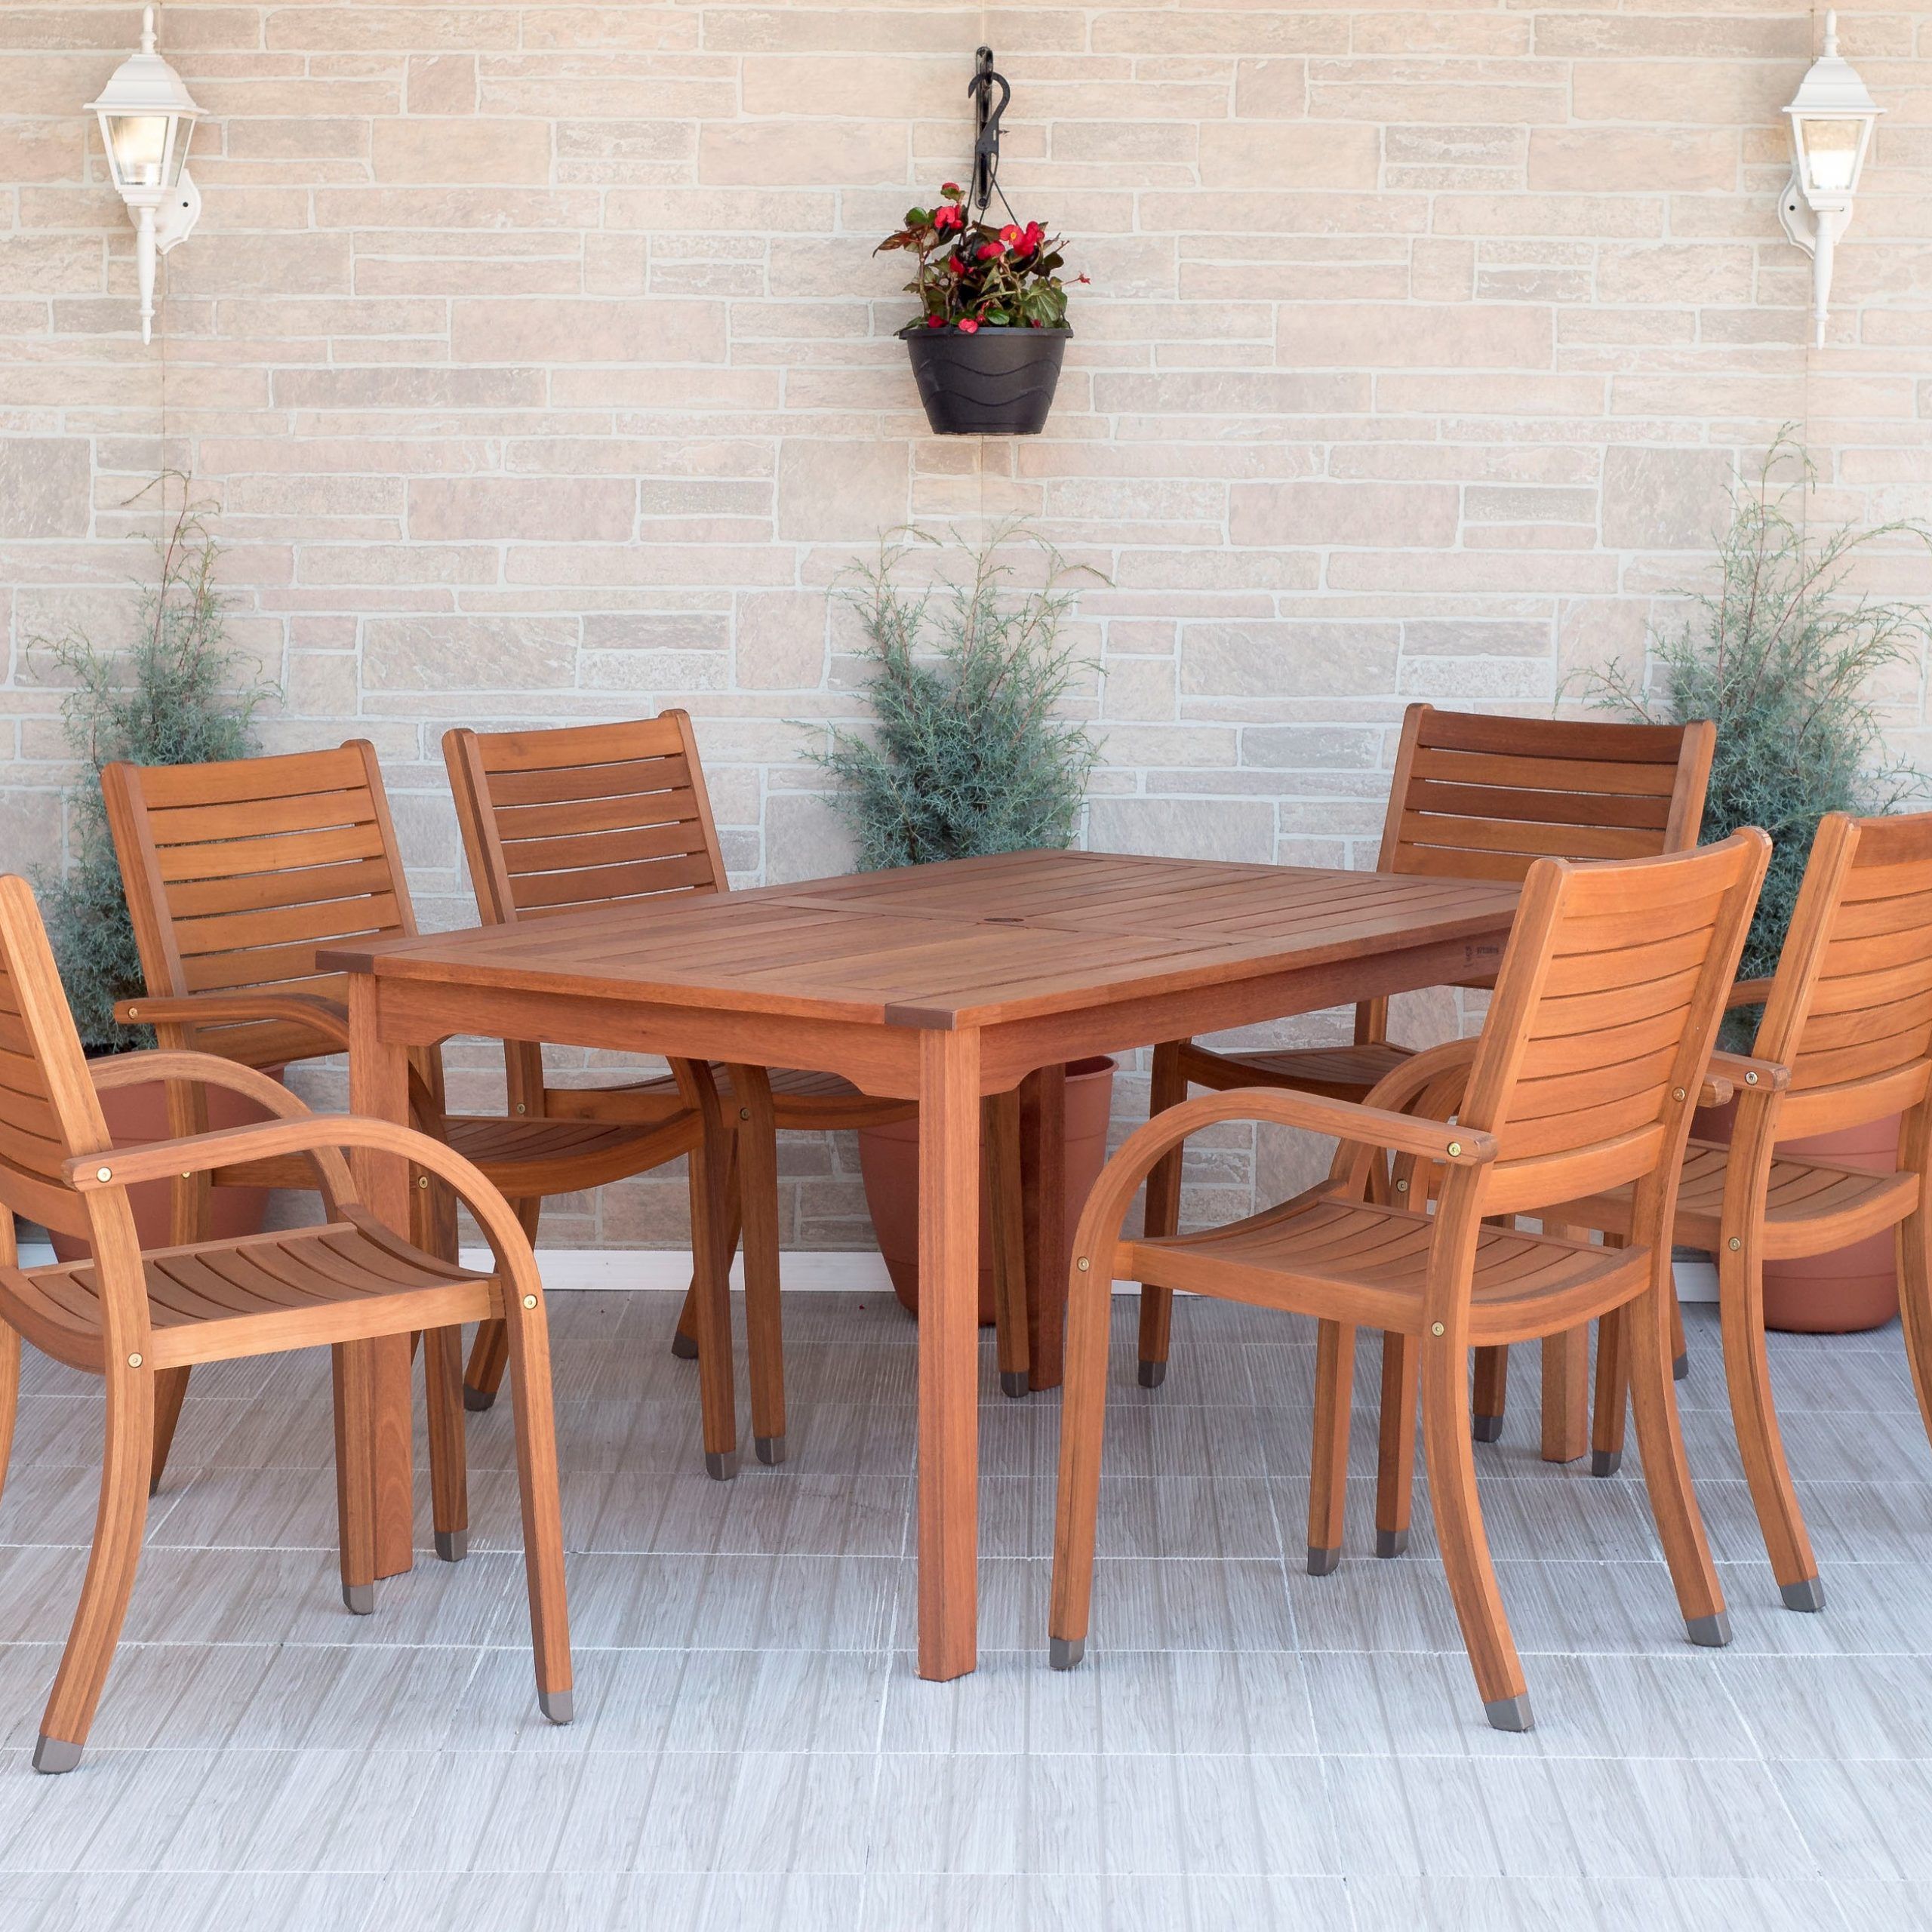 Rectangular 7 Piece Patio Dining Sets With Regard To Widely Used Amazonia Arizona 7 Piece Patio Rectangular Table Dining Set (View 3 of 15)